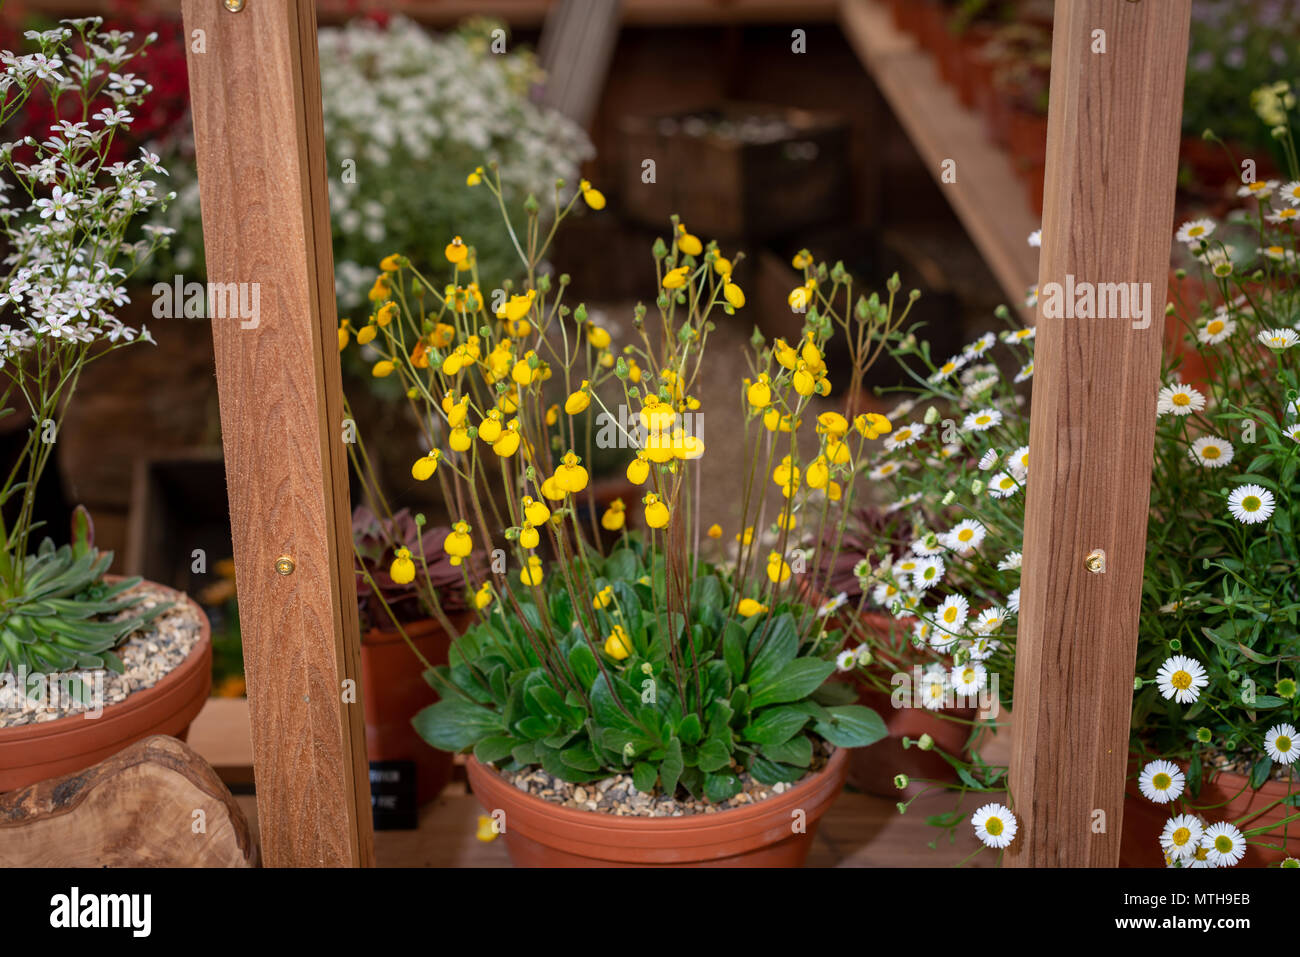 A wooden greenhouse with flowers. Stock Photo